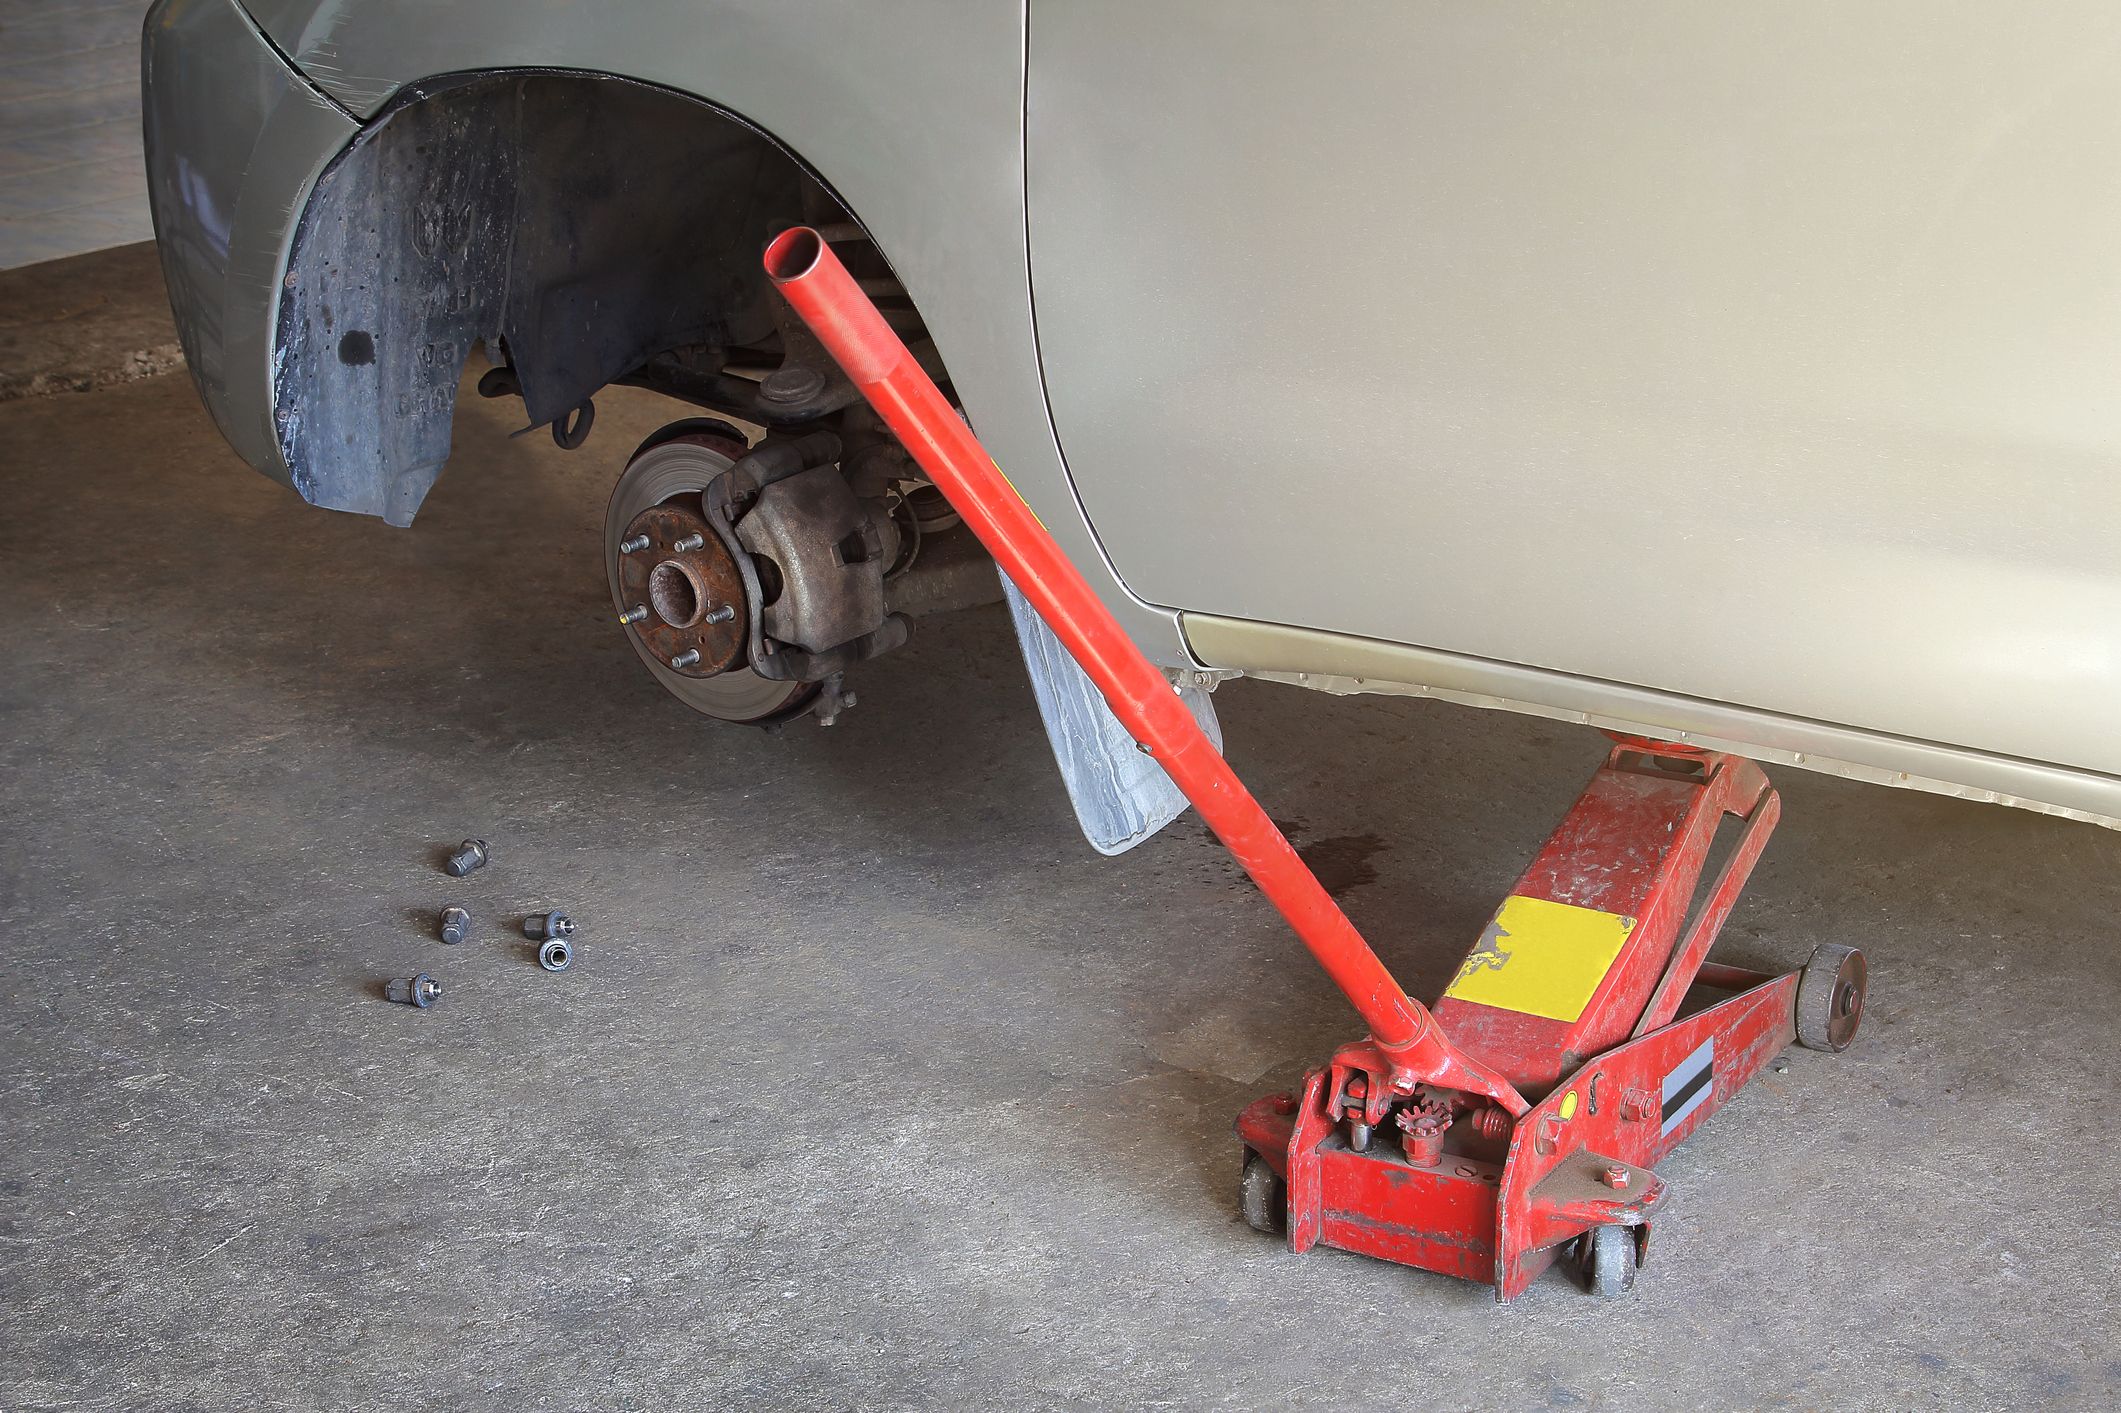 Use Car Jacks in the Shop to Lift & Level